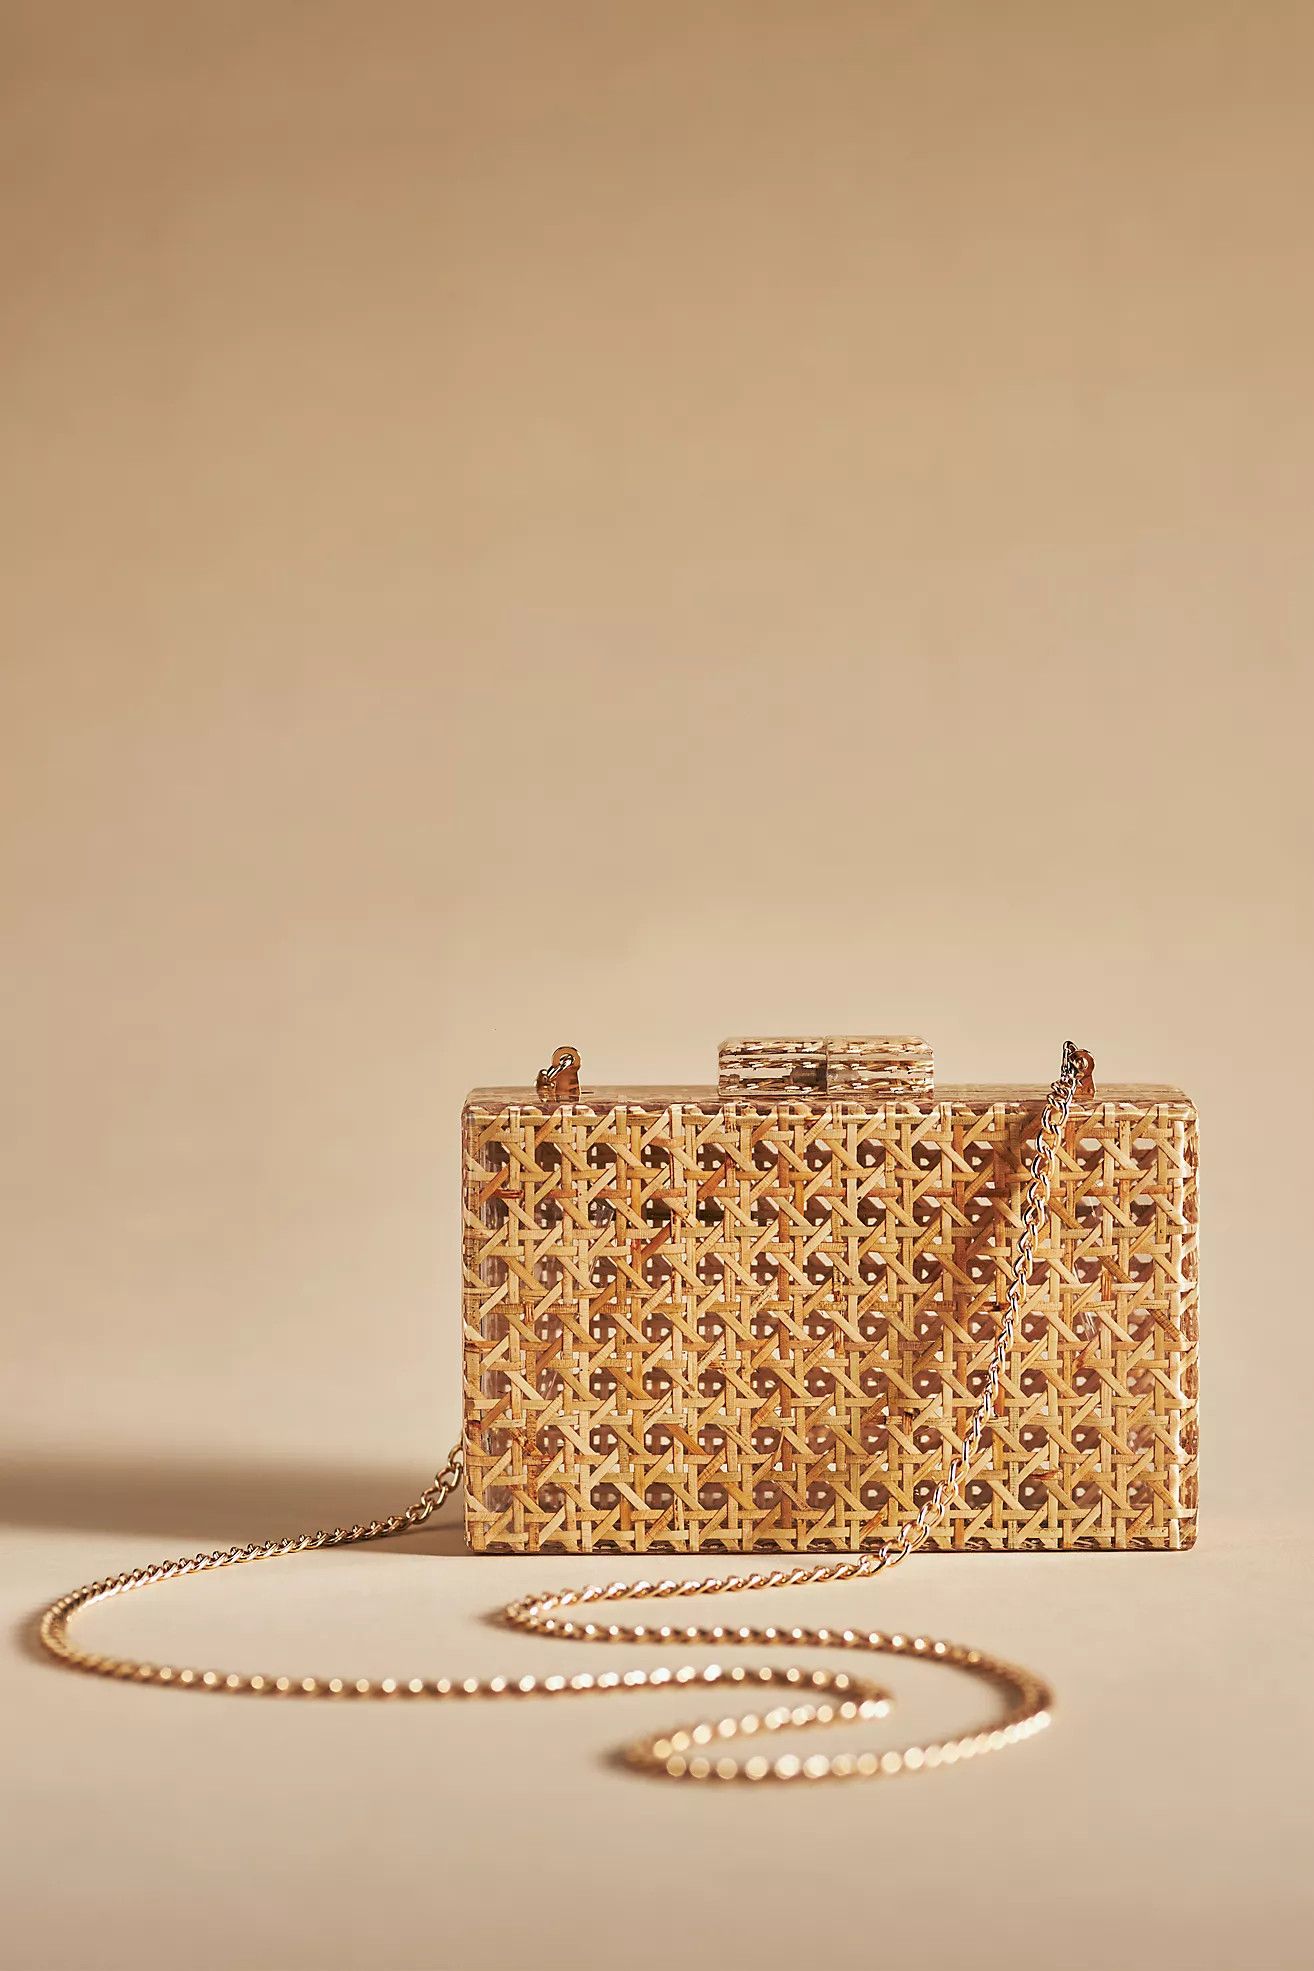 Rae of Light Acrylic Cane Clutch | Anthropologie (US)